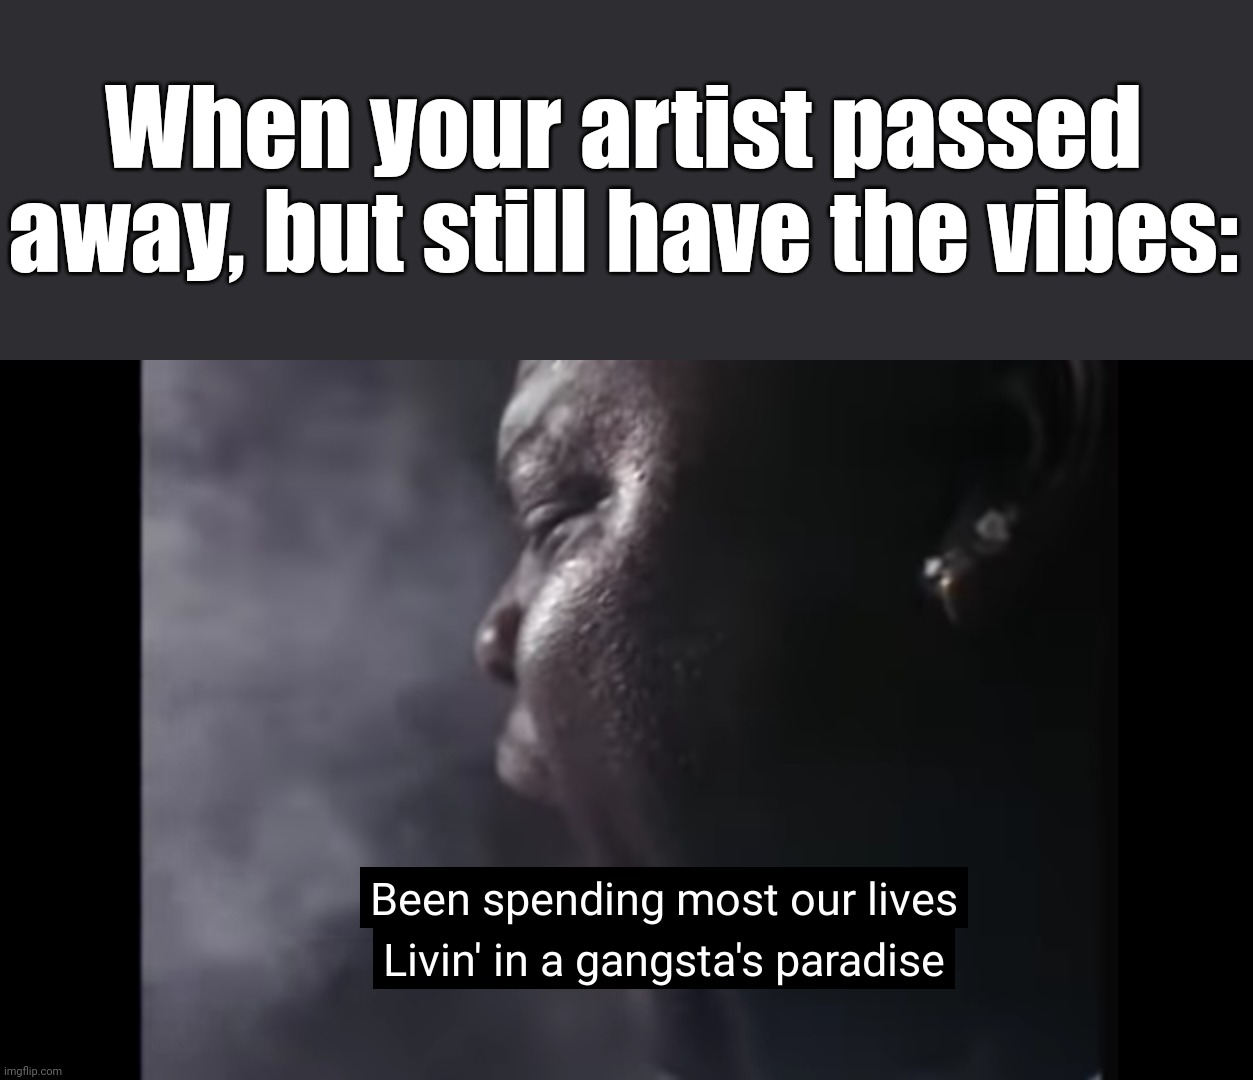 R.I.P Coolio - The maker of the famous hit. | When your artist passed away, but still have the vibes: | image tagged in gangstas paradise,coolio,memes,press f to pay respects,you can't hear pictures,nostalgia | made w/ Imgflip meme maker